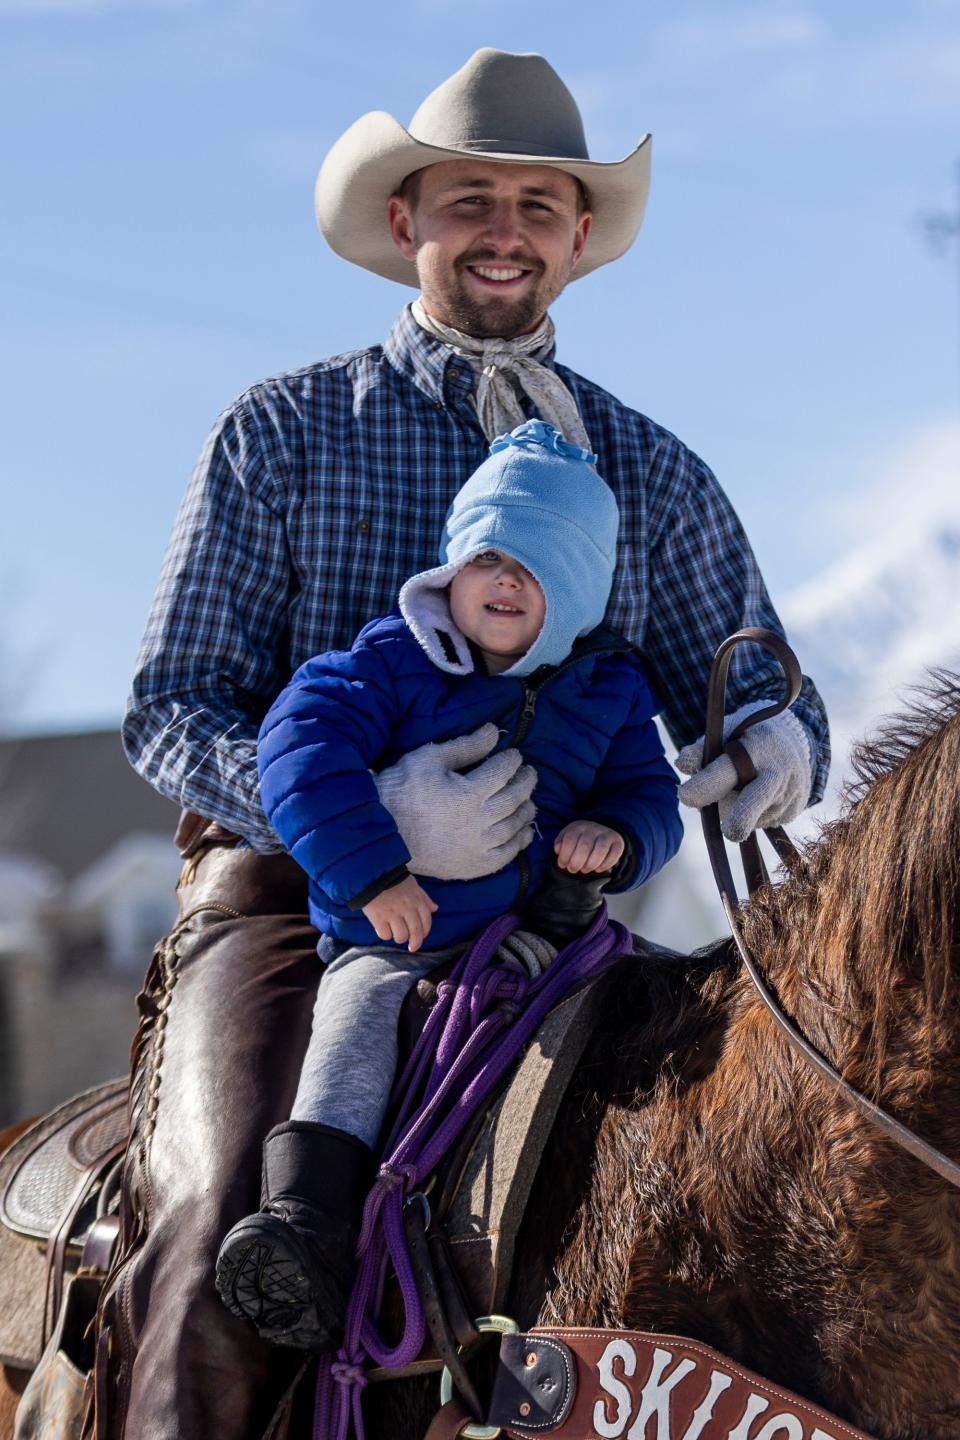 Preston Arnoldsen and his son Porter pose for a portrait during the 2024 Utah Skijoring competition at the Wasatch County Event Complex in Heber City on Saturday, Feb. 17, 2024. Arnoldsen is a past skijoring champion where he won $5,000. “It’s not about the money, it’s about the family,” he says. | Marielle Scott, Deseret News